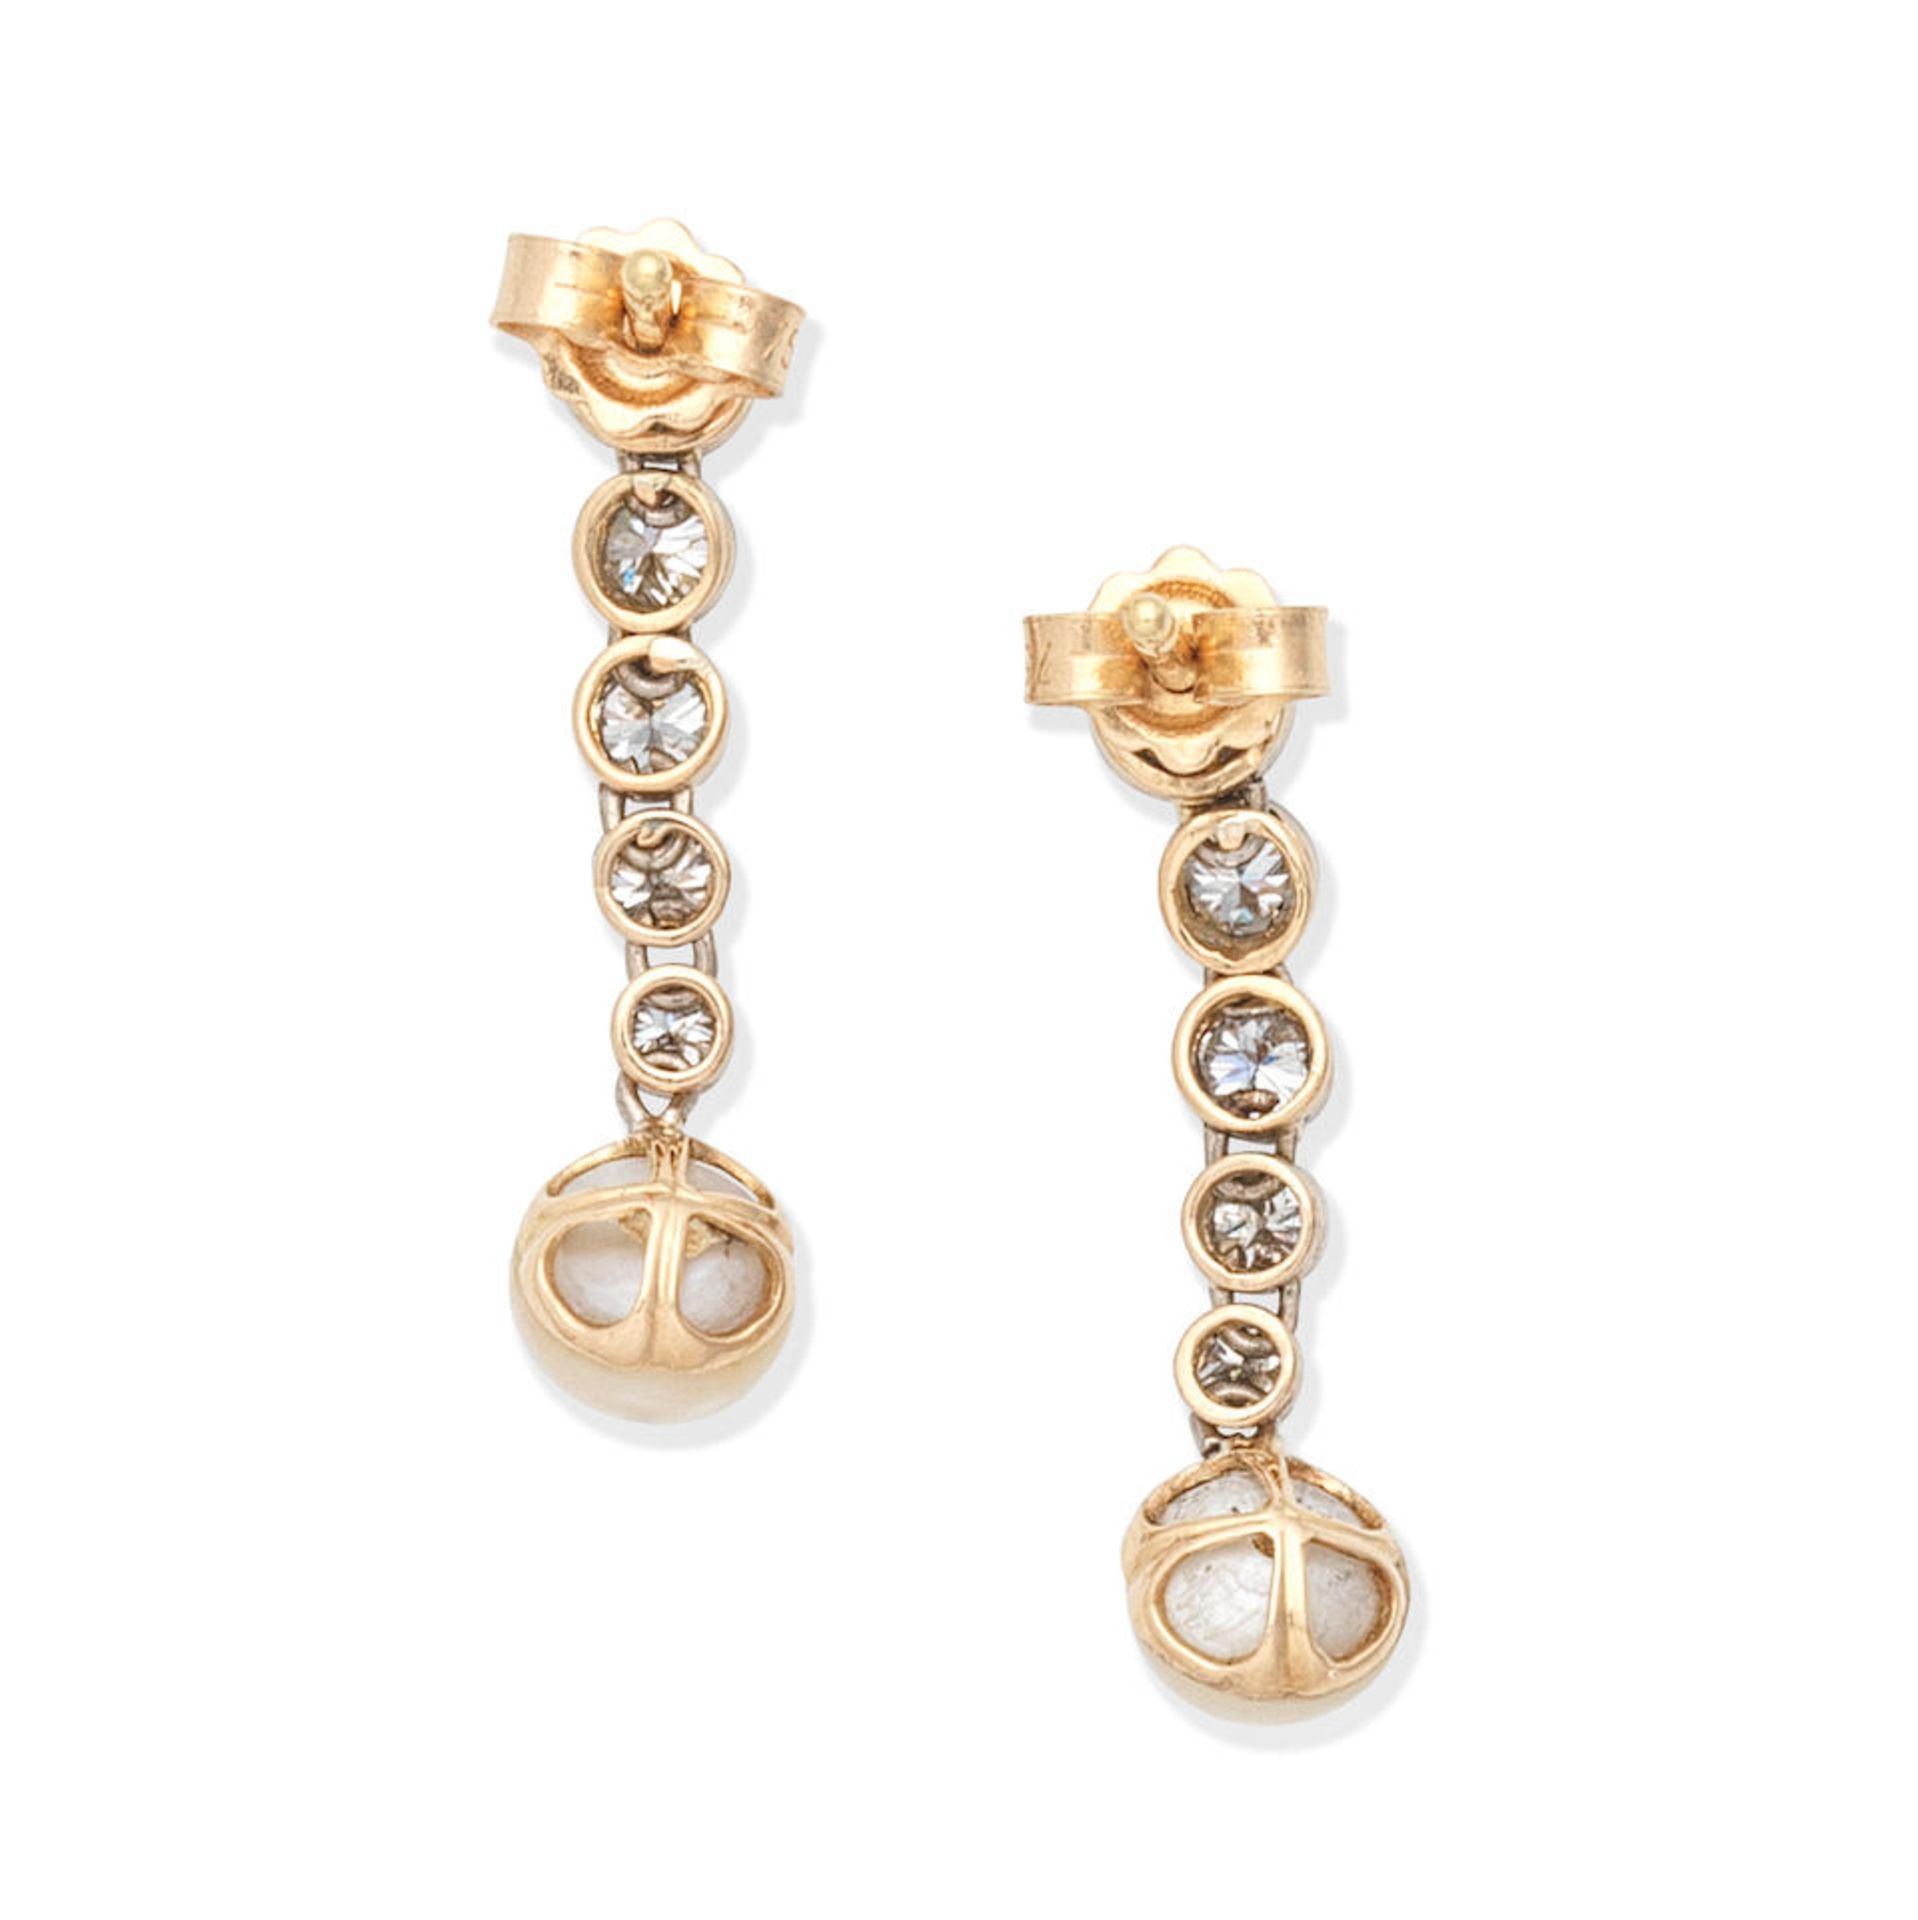 CULTURED PEARL AND DIAMOND EARRINGS - Image 3 of 3